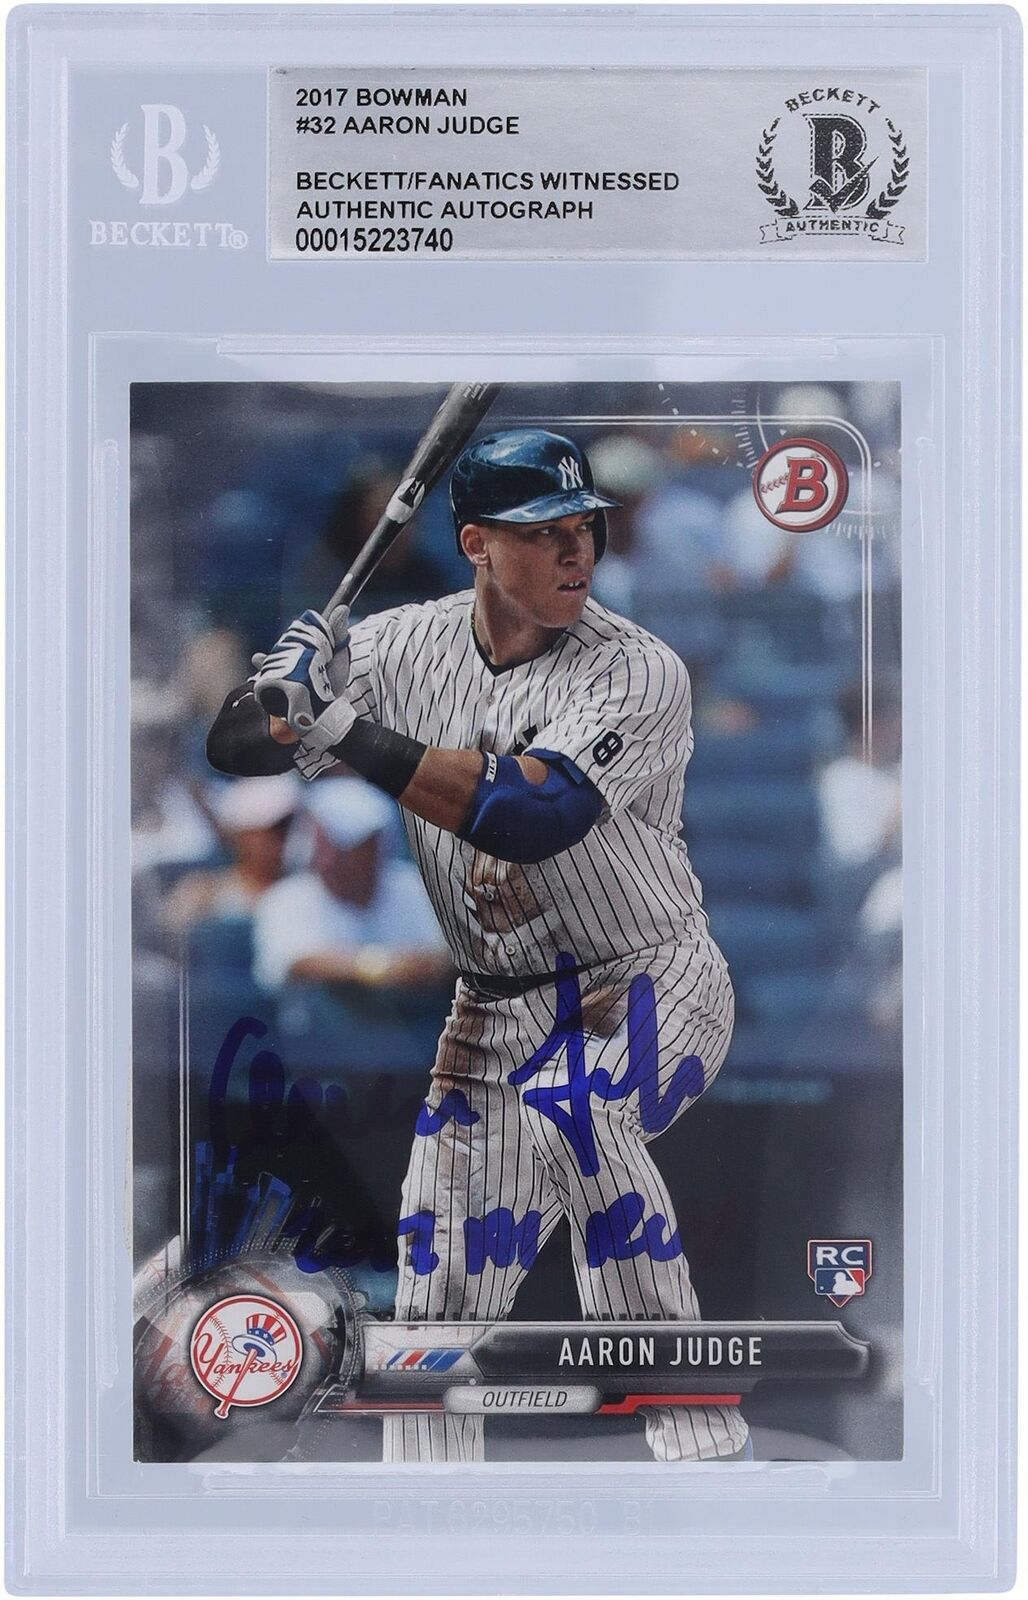 Most valuable Aaron Judge rookie cards: 2017 Bowman Draft Aaron Judge Rookie Card #BD-40